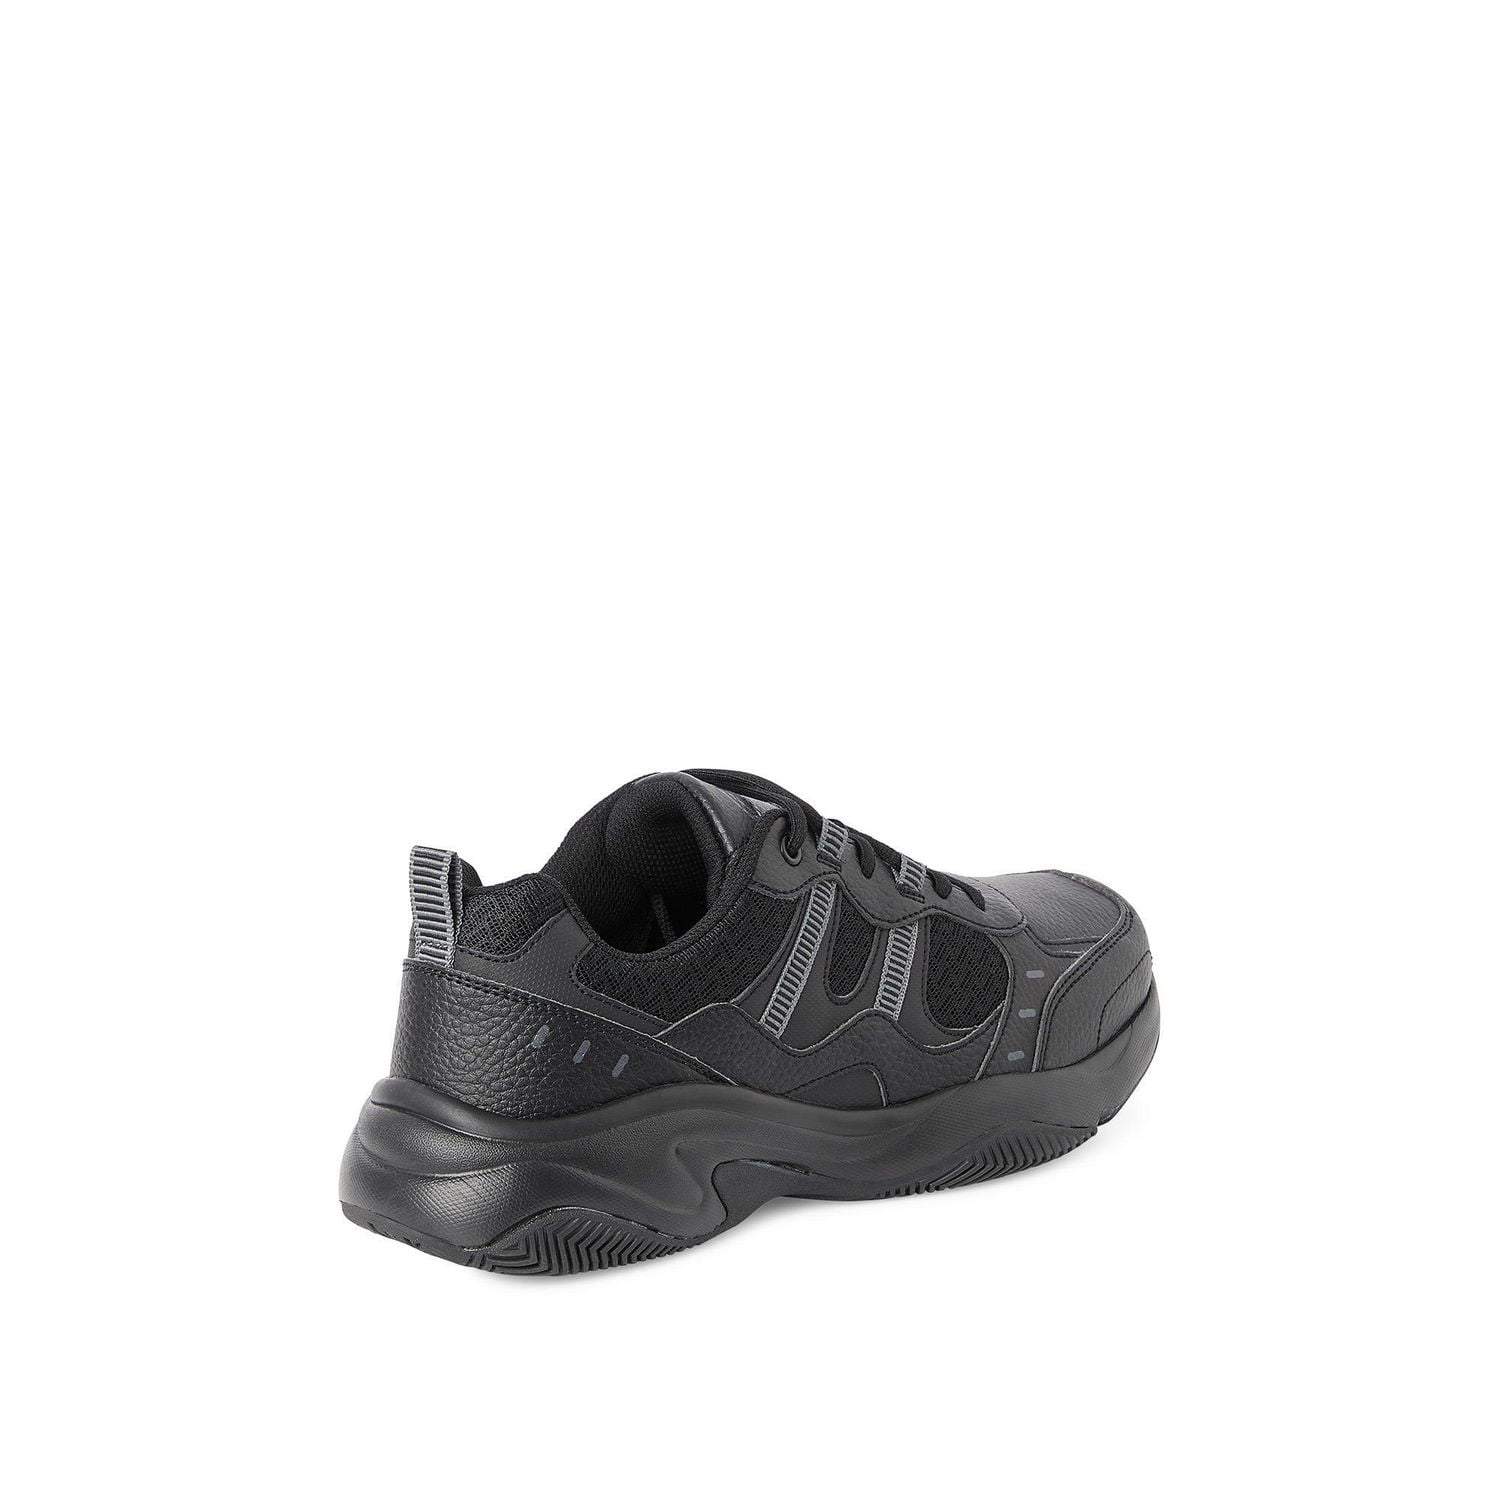 Skechers Women Xs Grey Tops - Get Best Price from Manufacturers & Suppliers  in India